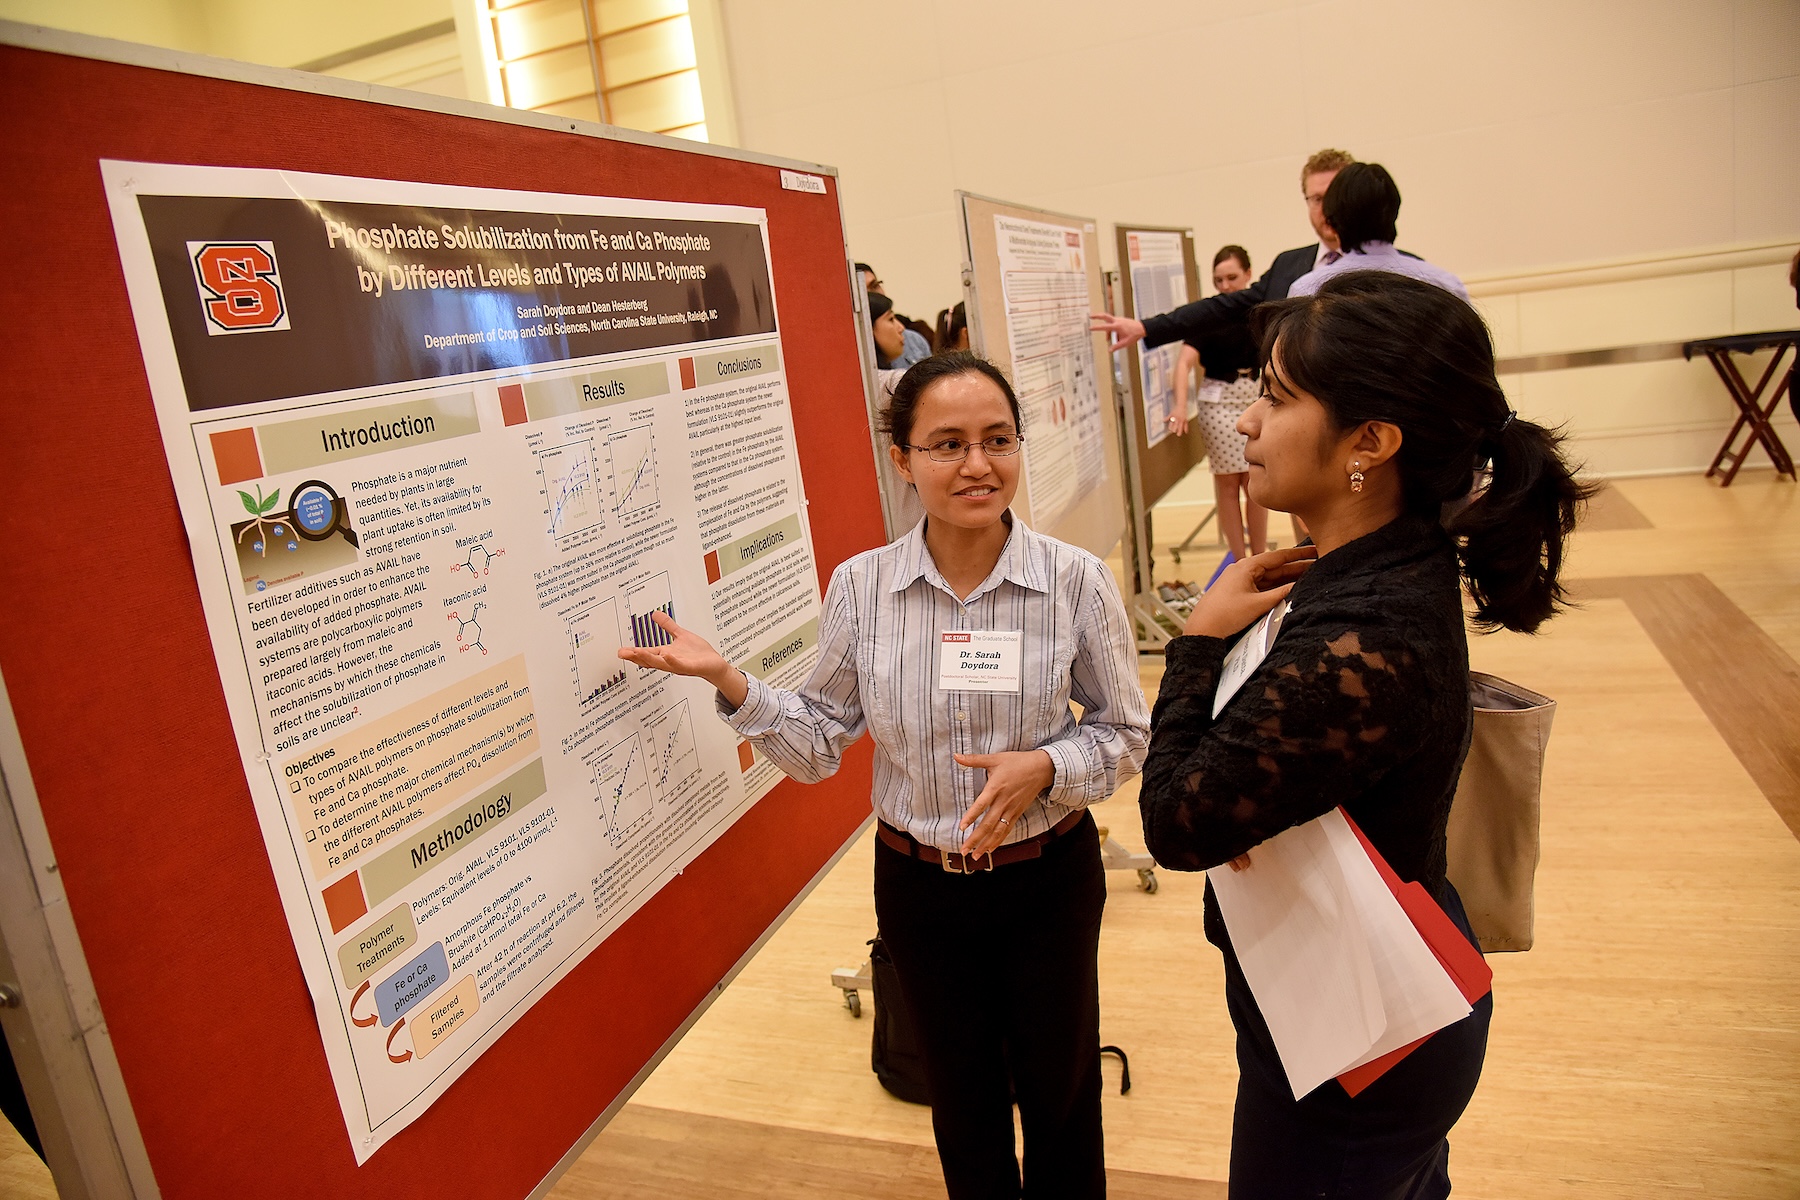 A student presenting her senior design poster to an event attendee